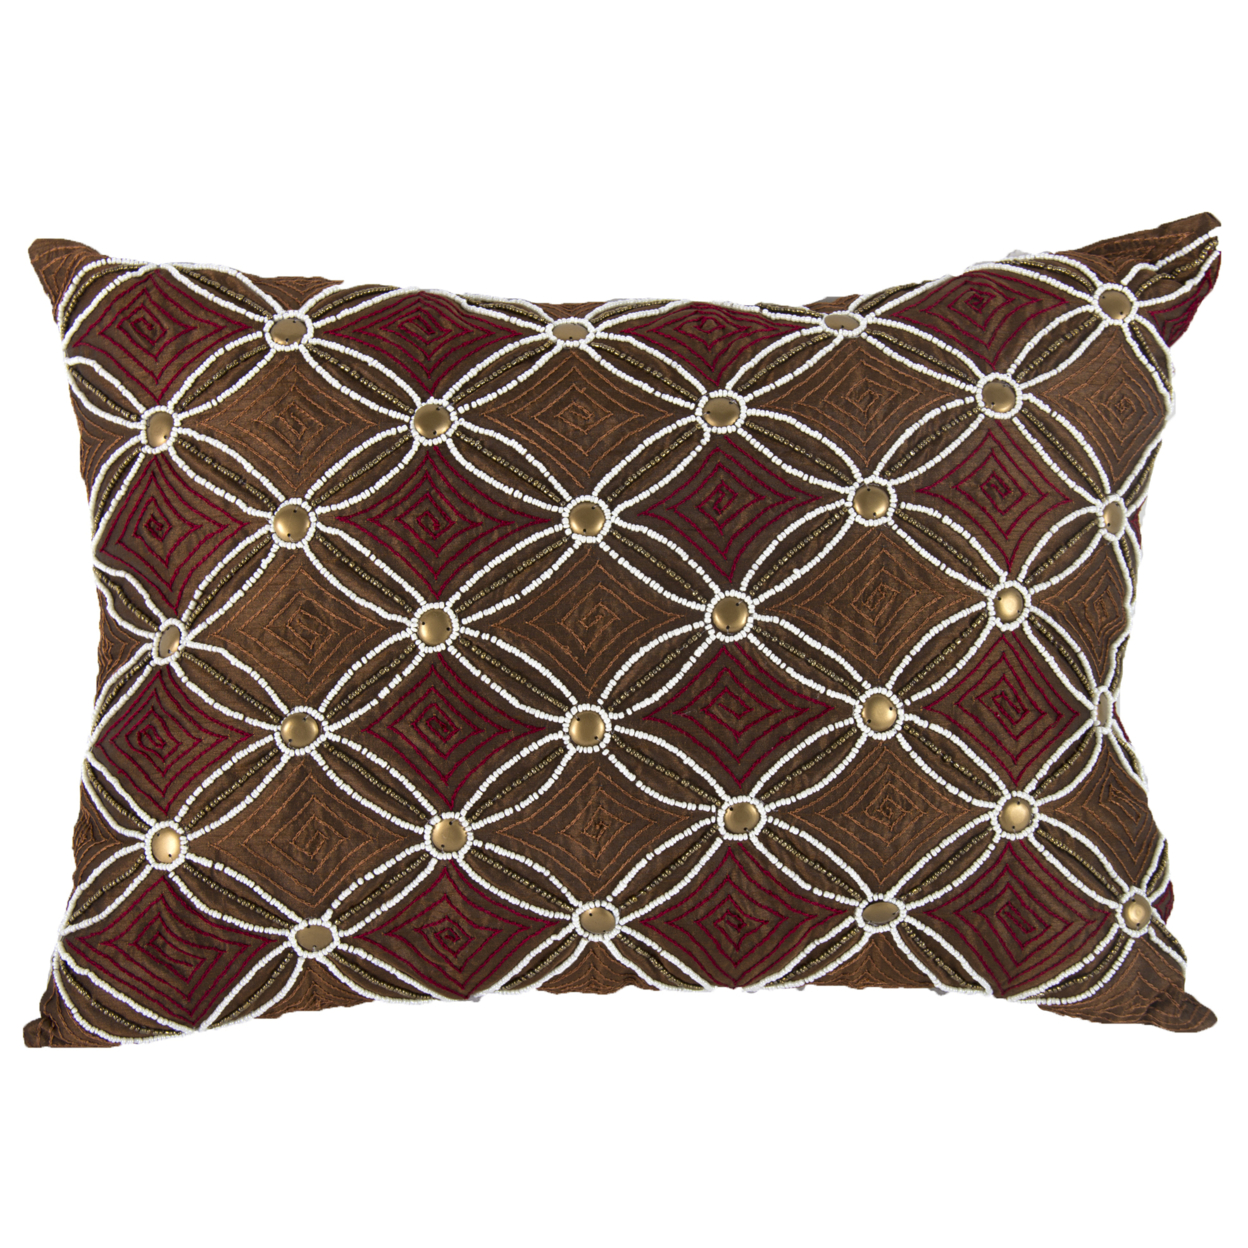 20 X 14 Inch Poly Silk Embellished Cotton Pillow, Set Of 2, Copper And Red- Saltoro Sherpi